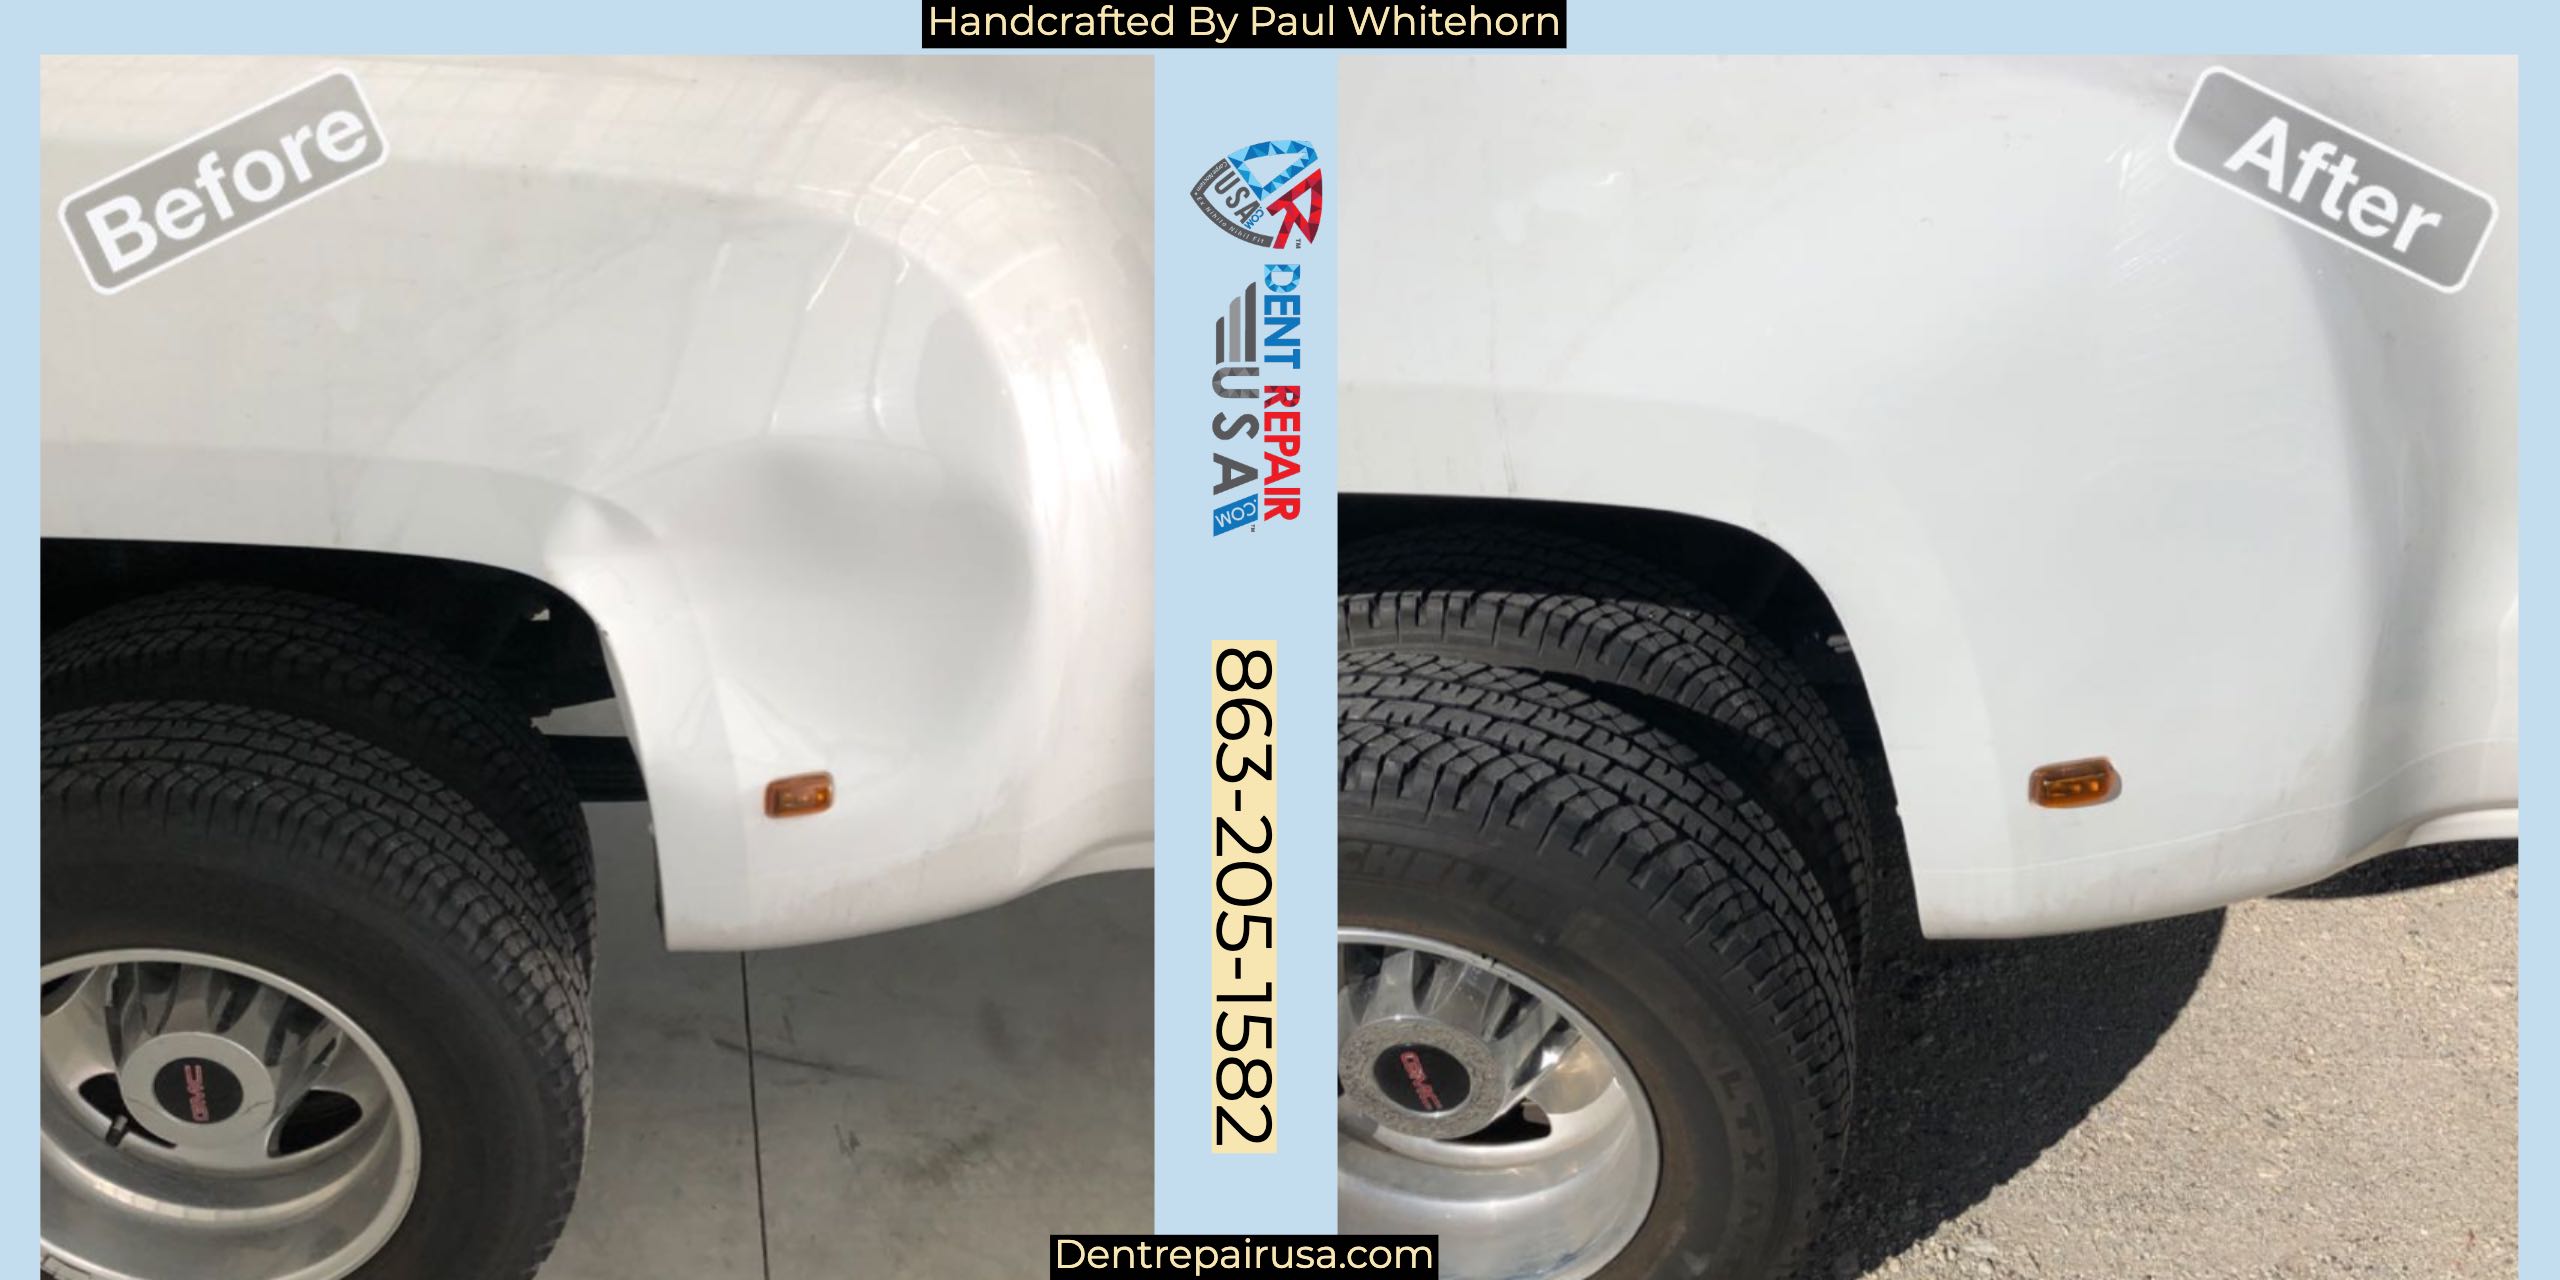  Who fixes dents in cars, Mobile paintless dent removal, Paintless dent removal,  Paintless dent repair in, Dent repair prices, 